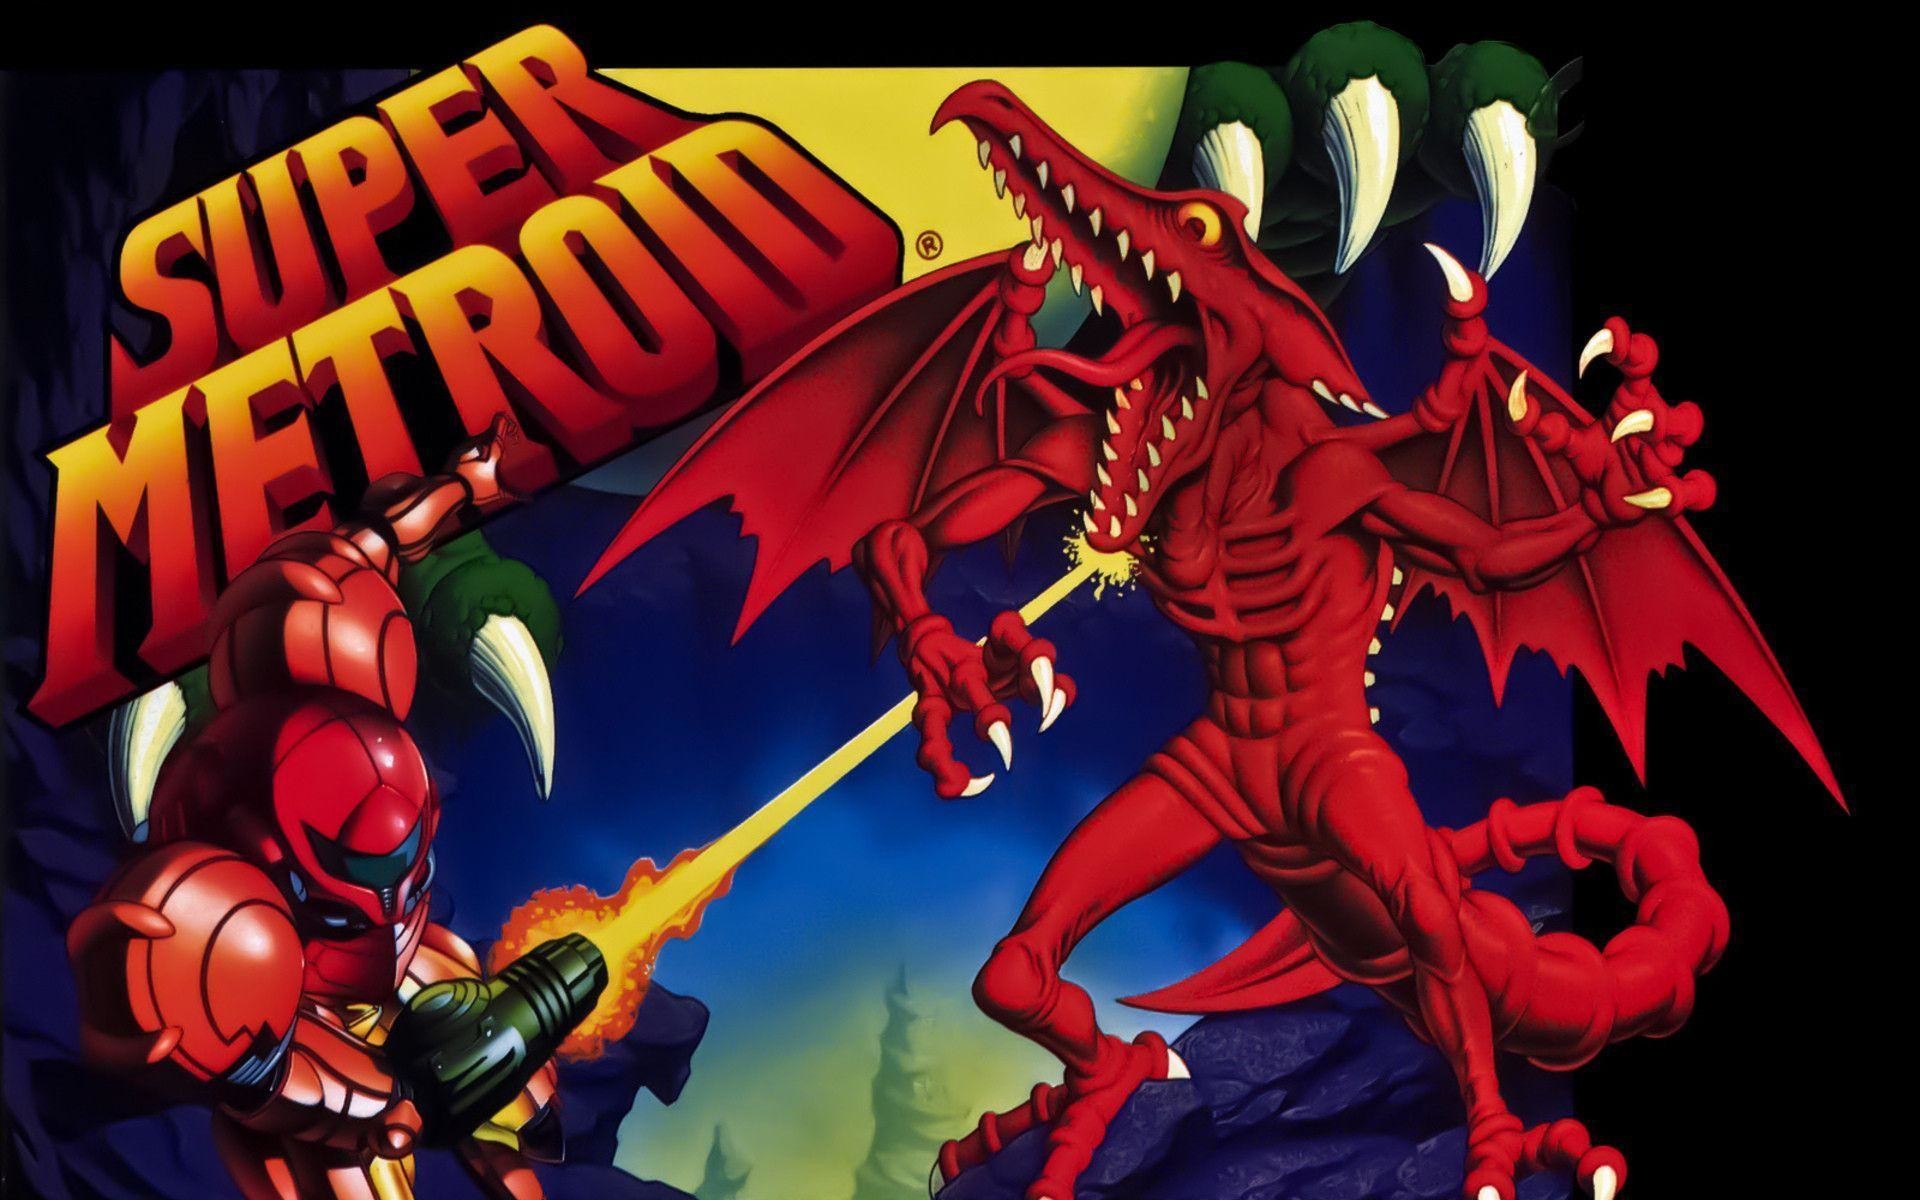 1920x1200 Download <b>Super Metroid wallpapers</b> to your cell phone -